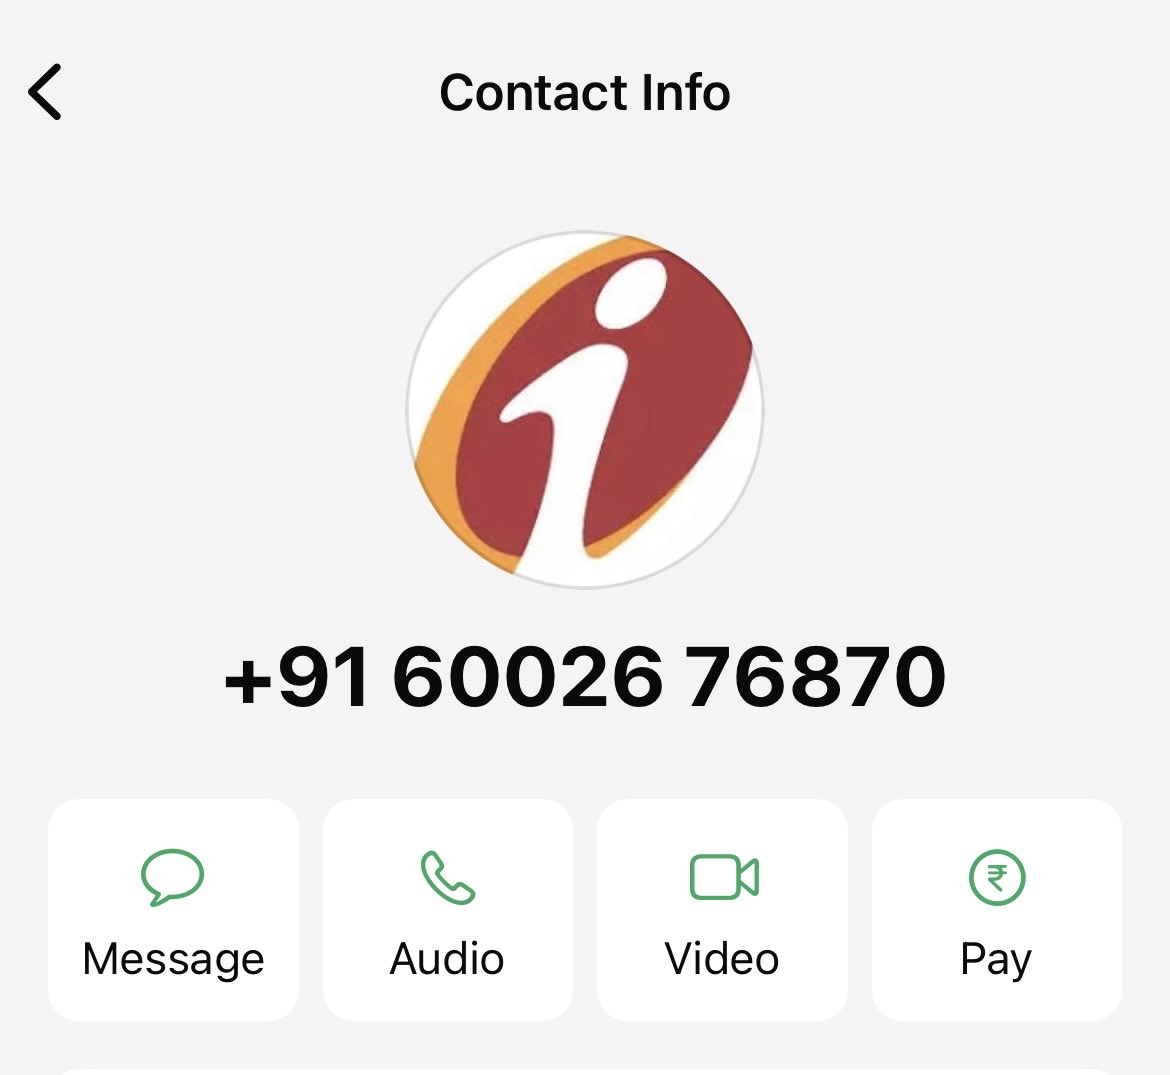 ⁦@ICICIBank⁩ ⁦@ICICIBank_Care⁩ the number in the attached image is being used by a fraudster to offer debit card upgrades. He poses as an employee and shares a random employee code with customers along with a fake email ID icicibank.cares@gmail.com. (1/2)